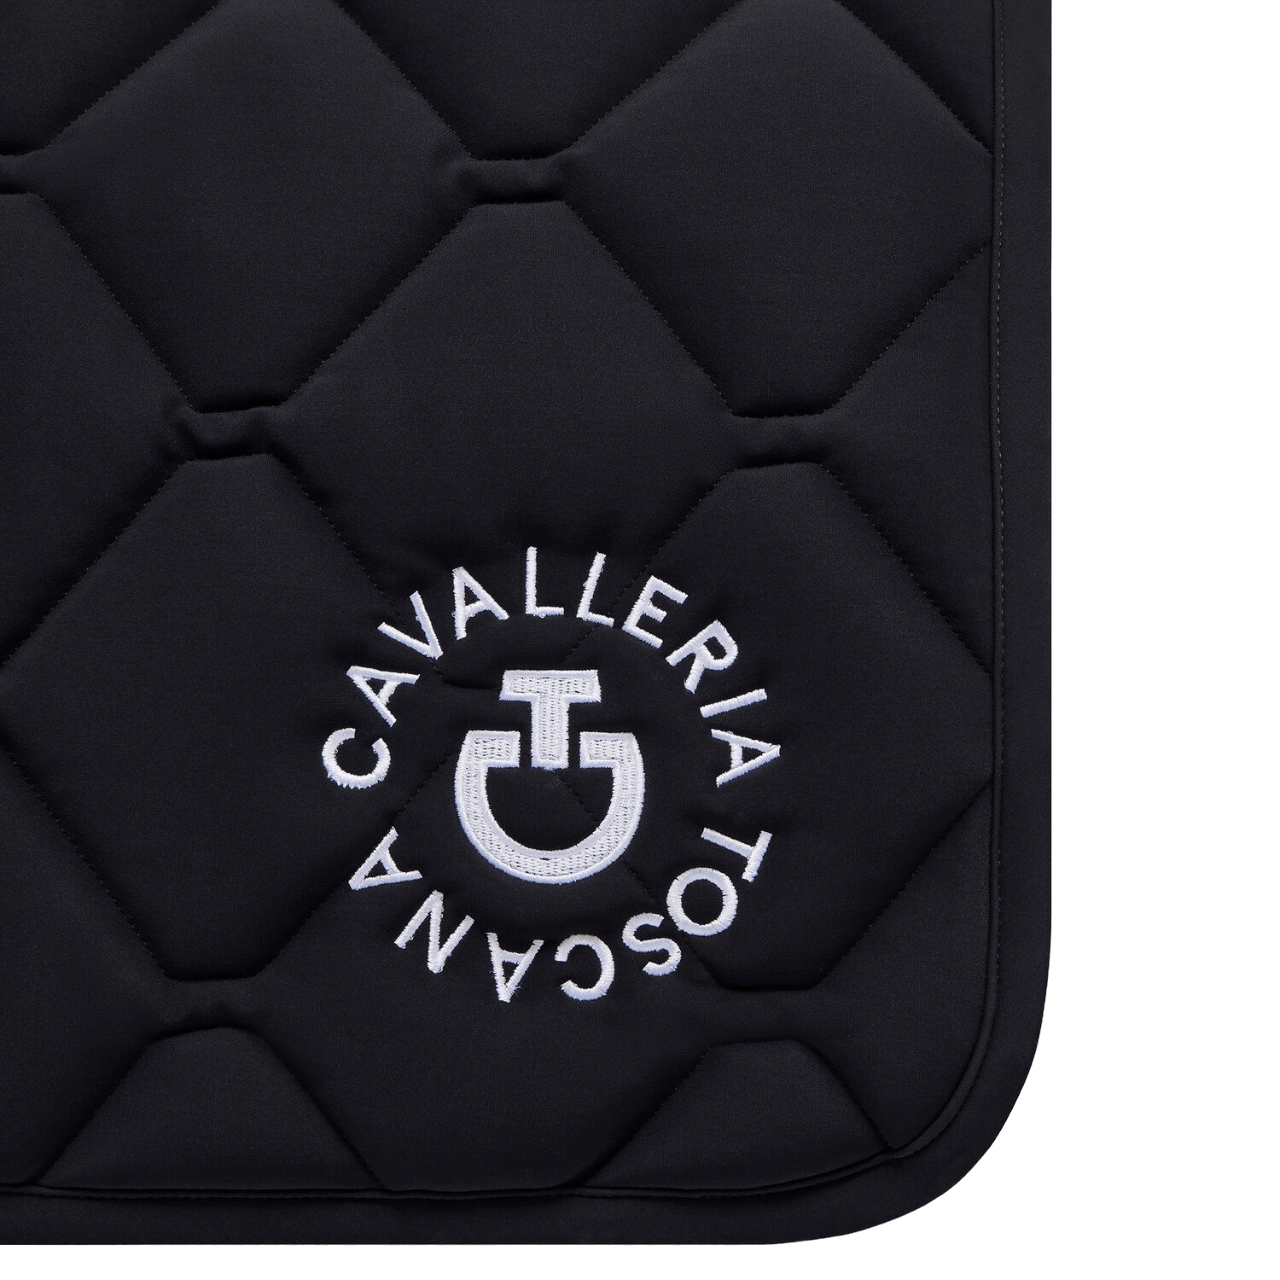 Cavalleria Toscana saddle pad quilted saddle pad made of breathable technical jersey.